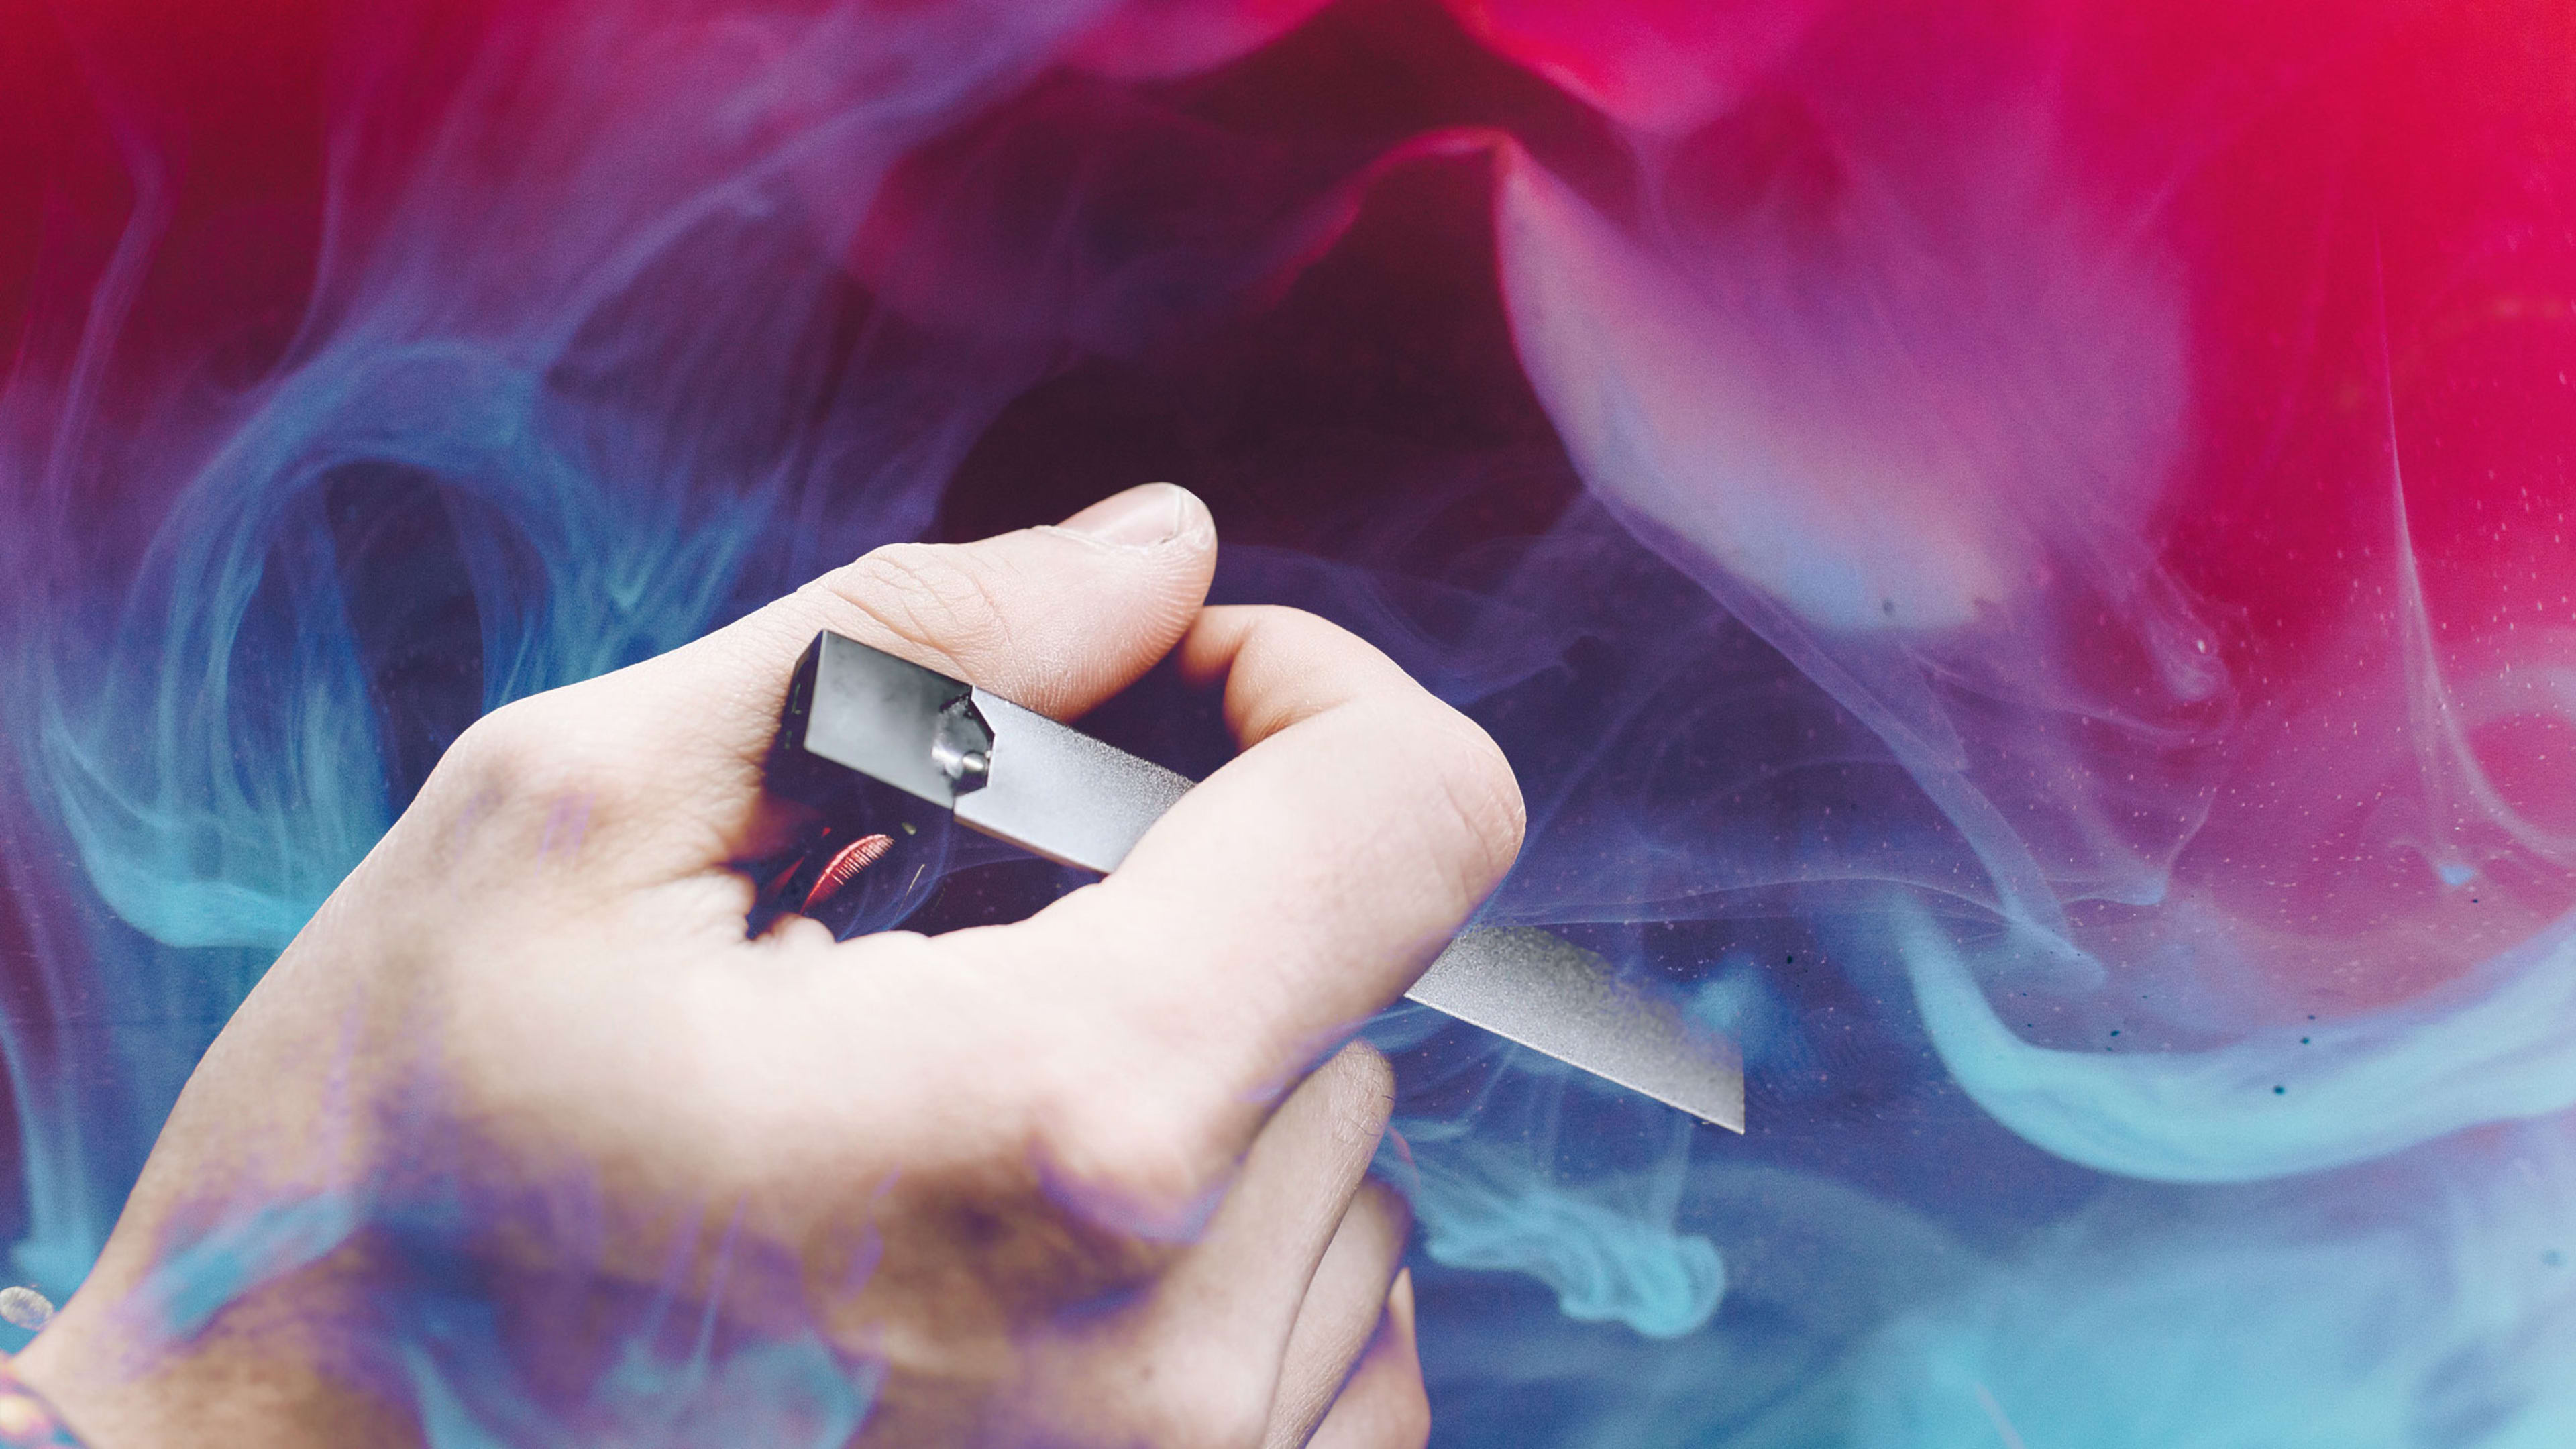 Is Juul making a comeback? Embattled vape company readies new device with age-verification tech